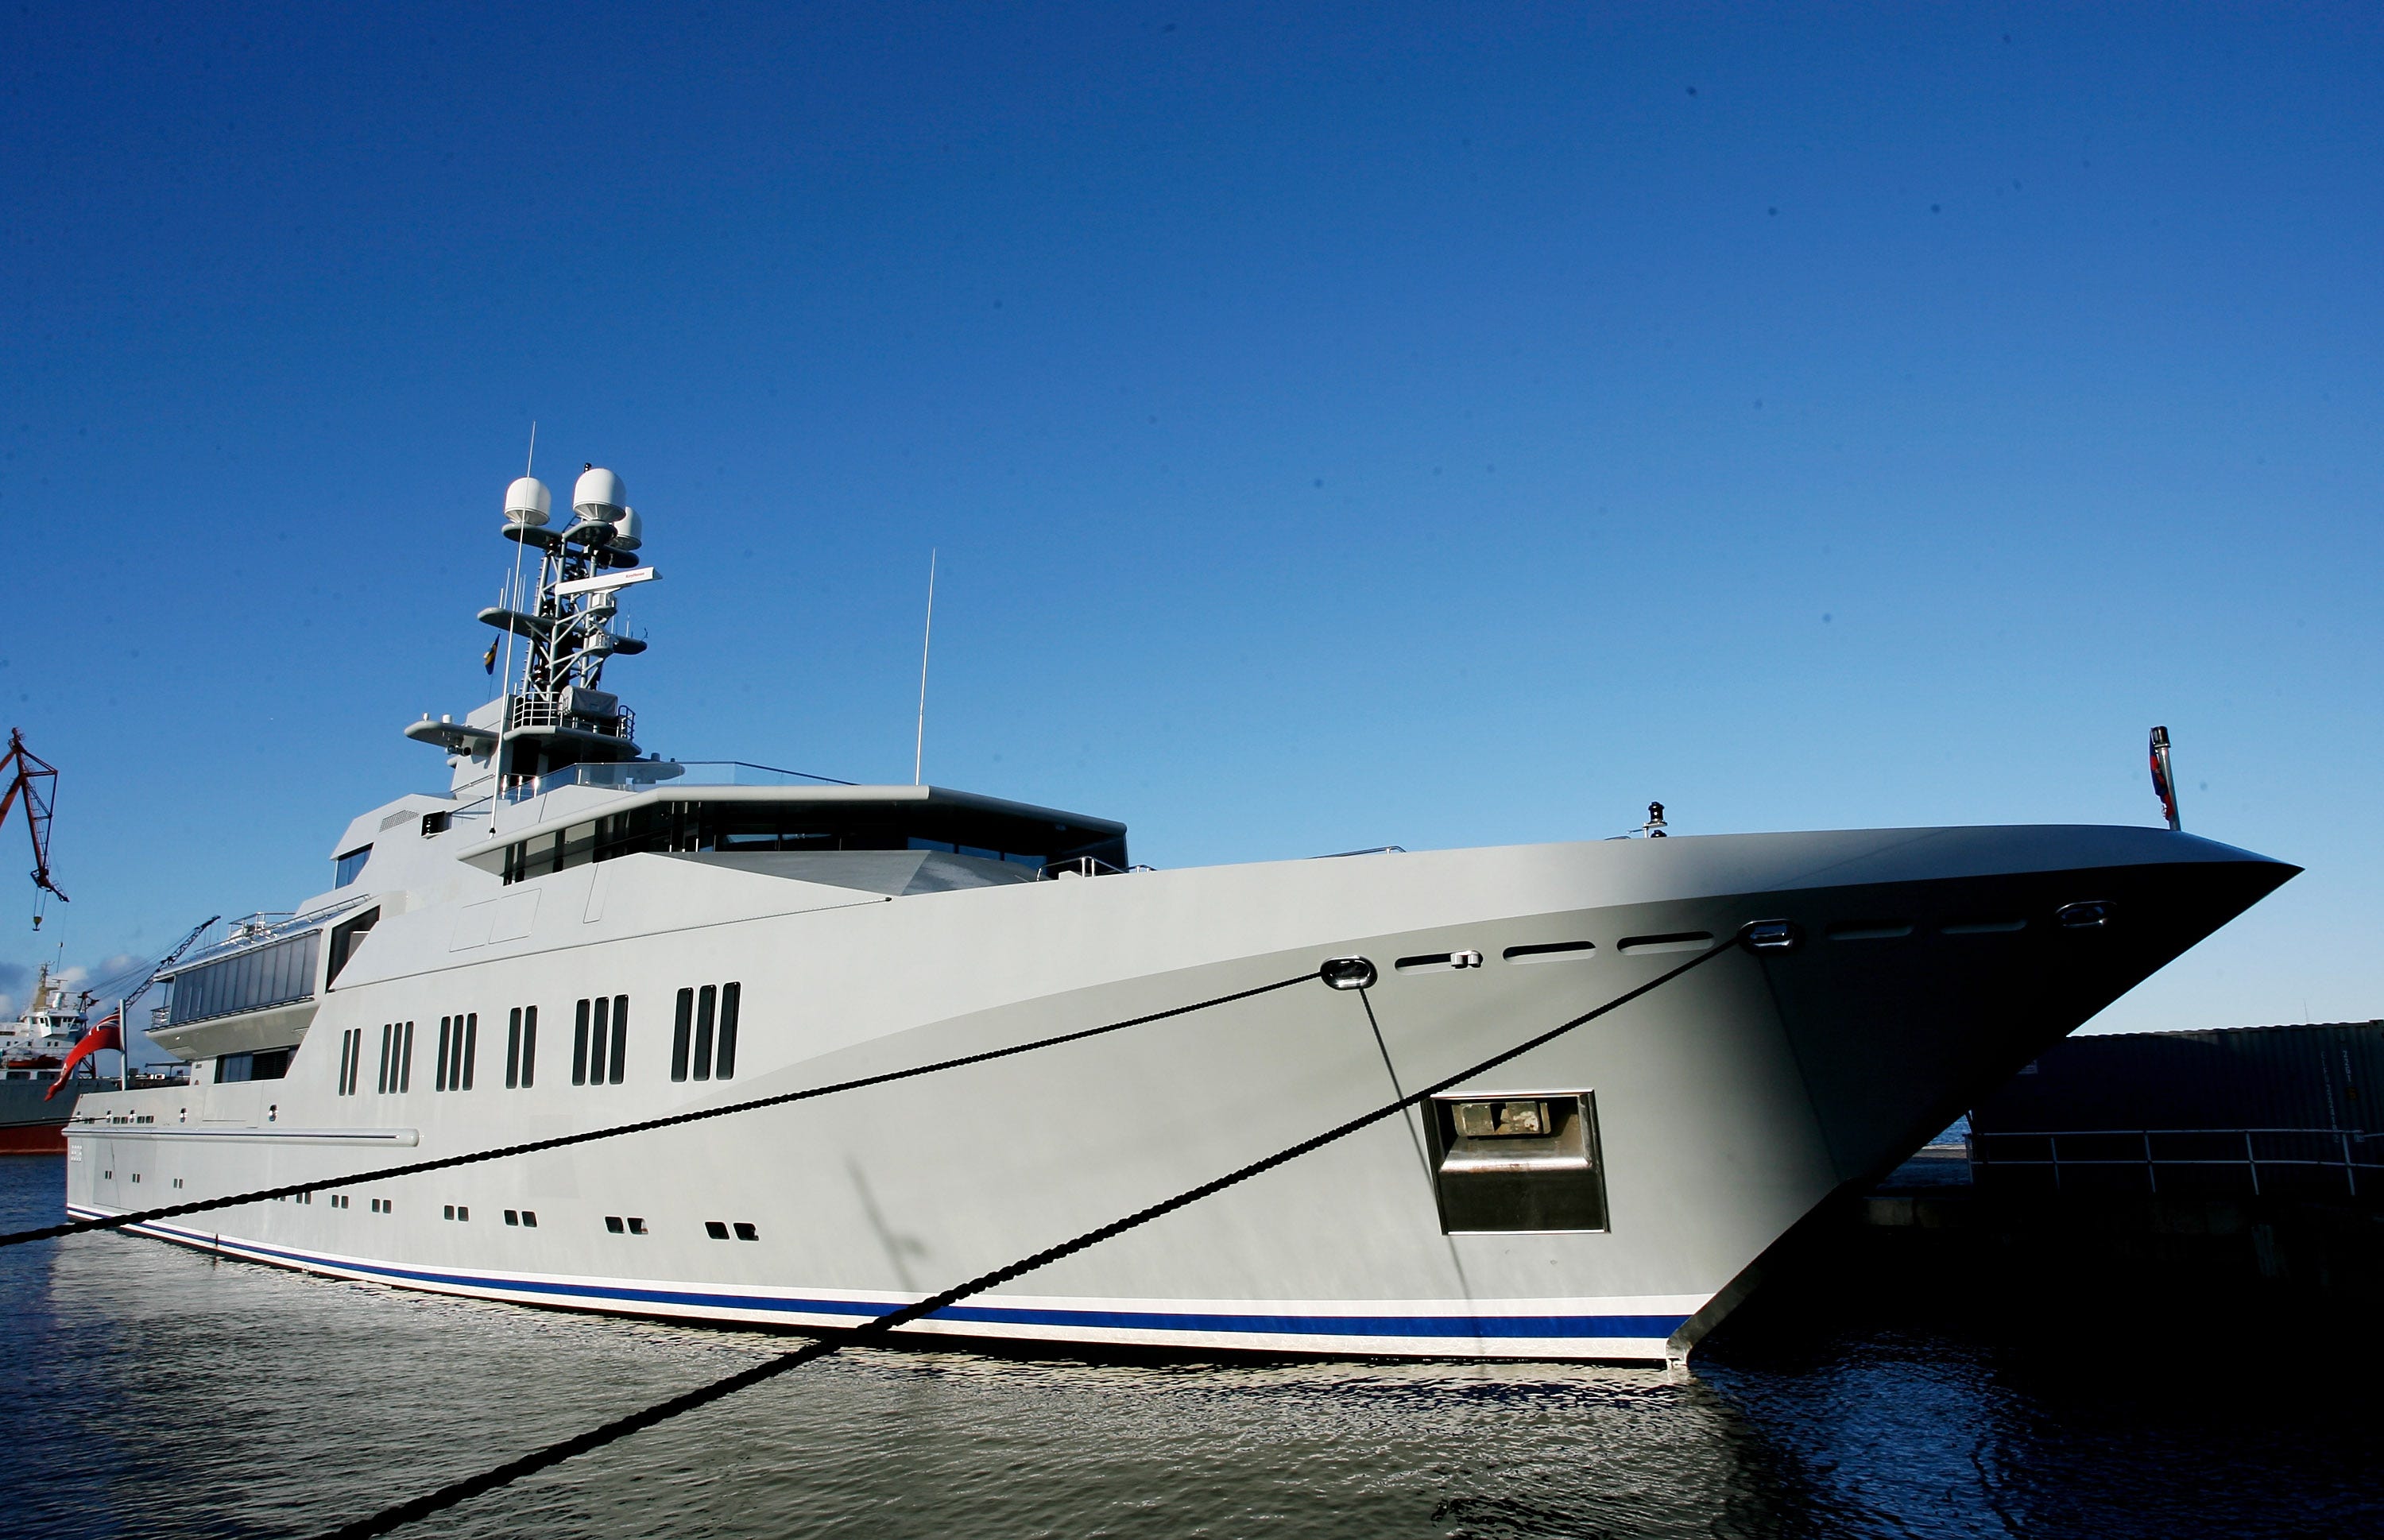 <p><a href="https://www.businessinsider.com/charles-simonyi-intentional-software-microsoft-2017-4">Early Microsoft employee Charles Simonyi</a> has purchased two megayachts from the German shipyard Lürssen: the 90-meter Norn and 71-meter Skat.</p><p>Delivered in 2023, Norn is full of luxe features, including an outdoor cinema and a pool floor that lifts to become a light-up dancefloor. It shares a militaristic style with <a href="https://www.businessinsider.com/microsoft-millionaires-who-spent-their-money-magnificently-2015-8">Skat</a>, which Simonyi sold in 2021.</p><p>Skats's name is derived from the Danish word for treasure, and it had a listing price of 56.5 million euros and was launched in 2002.</p><p>"The yacht is to be home away from my home in Seattle, and its style should match the style of the house, adapted for the practicalities of the sea," Simonyi <a href="https://www.boatinternational.com/yachts/the-superyacht-directory/skat--60591">once said</a>.</p>